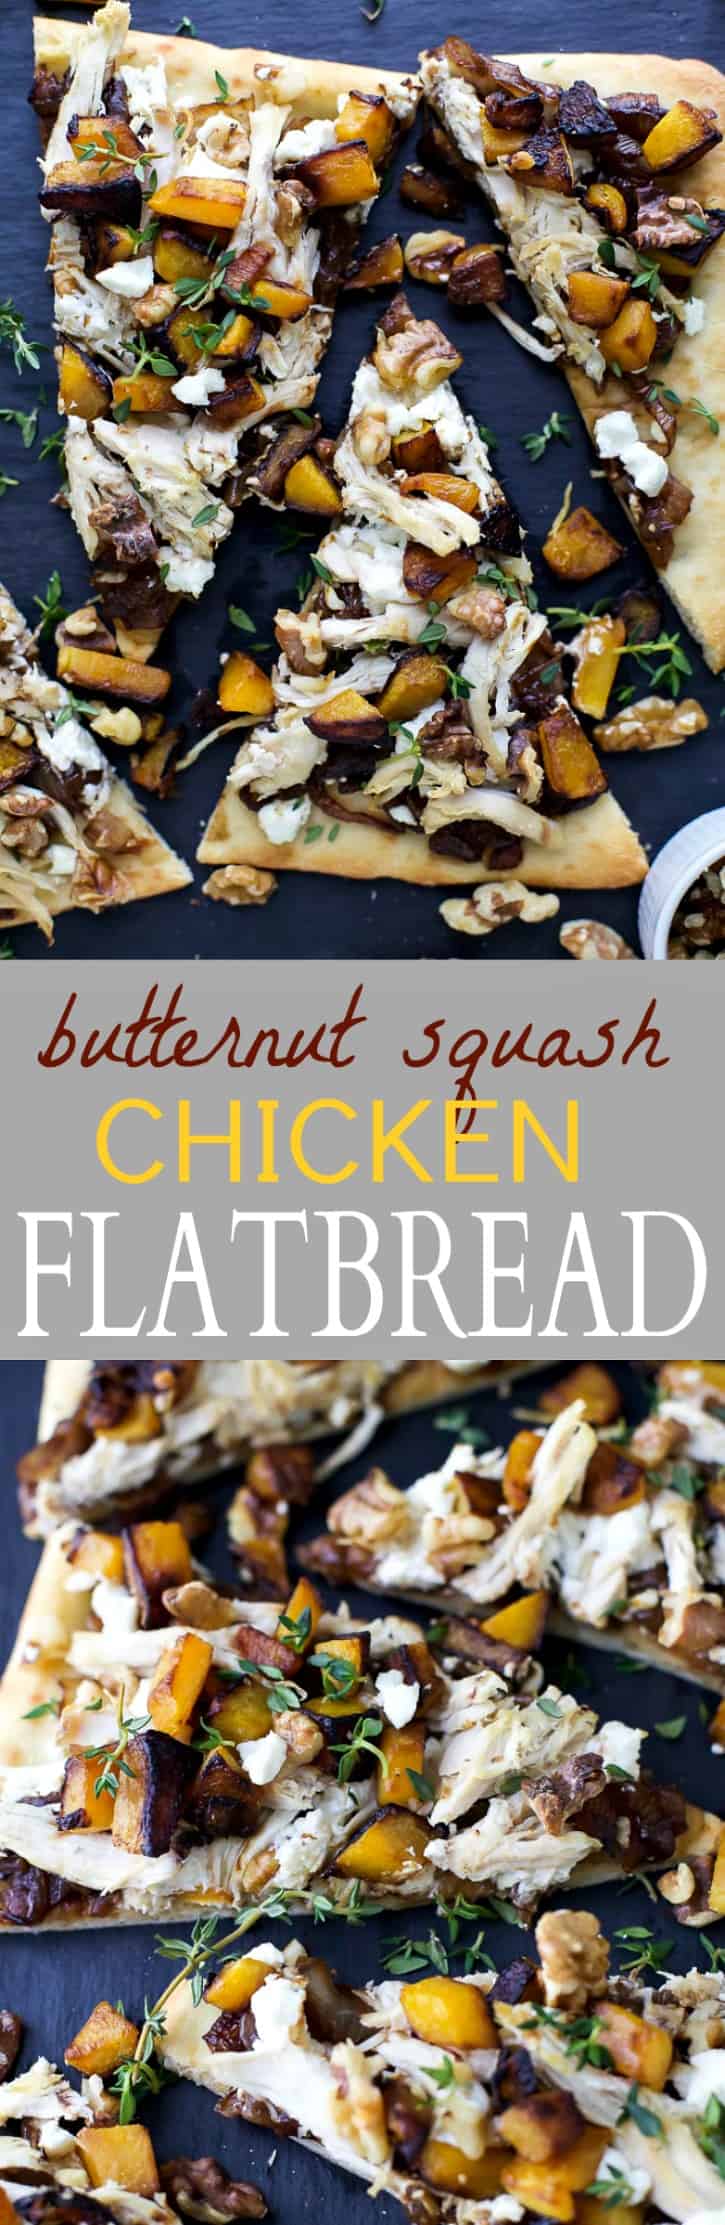 Slices of Butternut Squash Chicken Flatbread Pizza with balsamic caramelized onions and goat cheese and recipe title text for Butternut Squash Chicken Flatbread